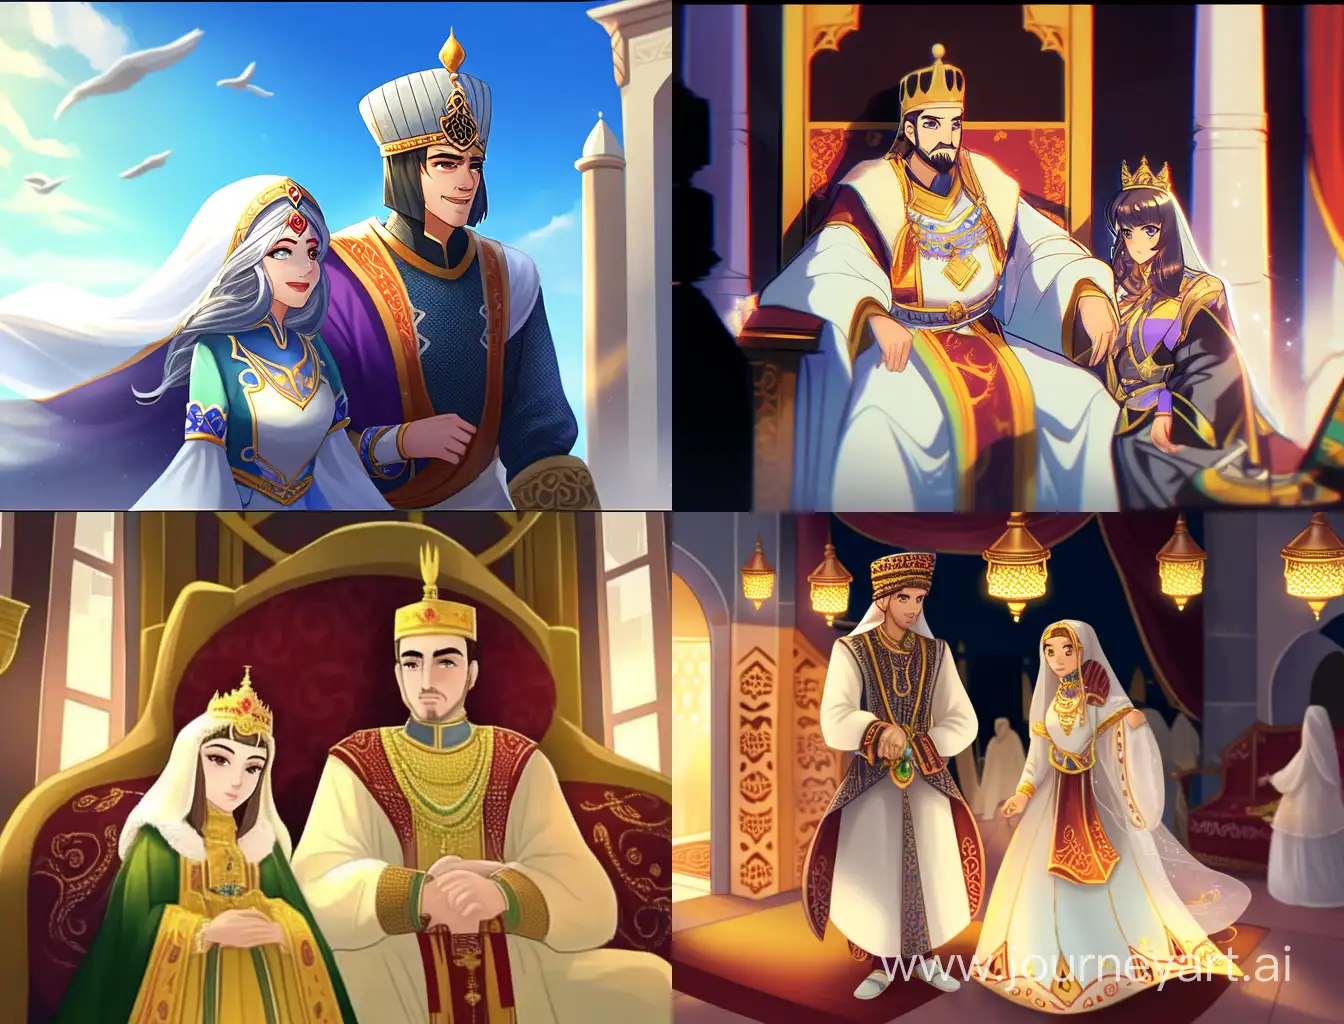 King-Mohammadreza-and-Wife-in-Majestic-Iranian-Setting